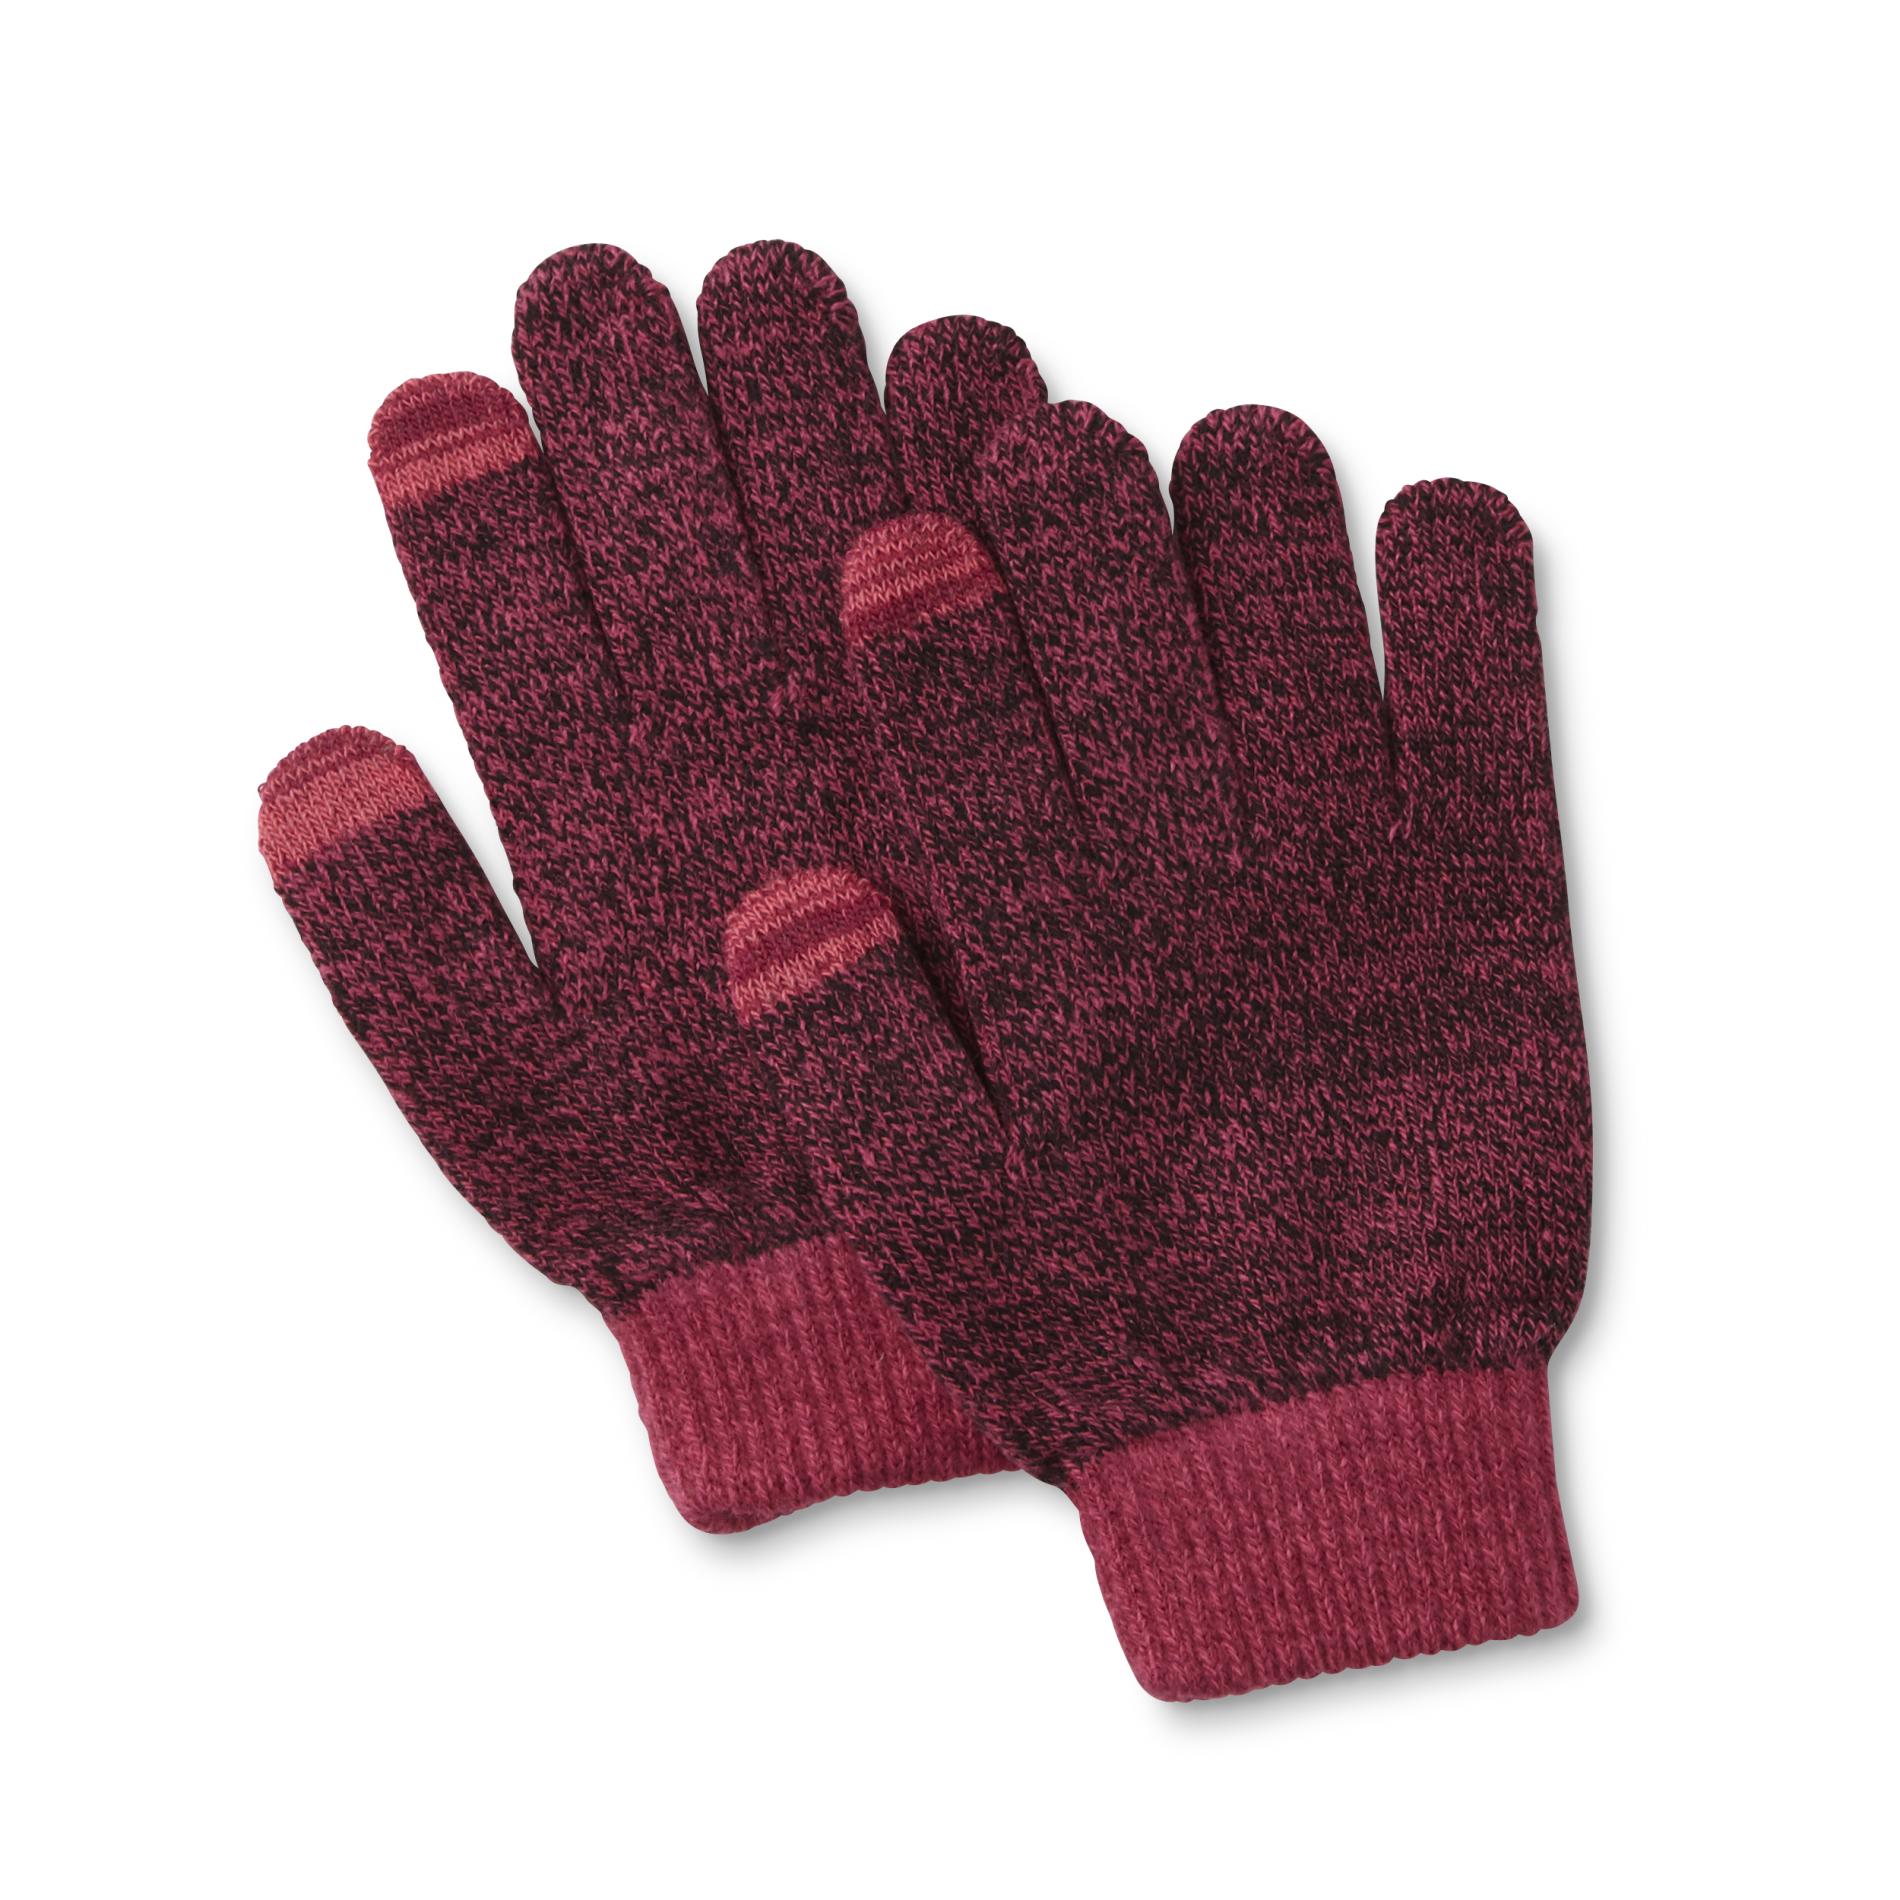 Women's Texting Gloves - Space Dyed